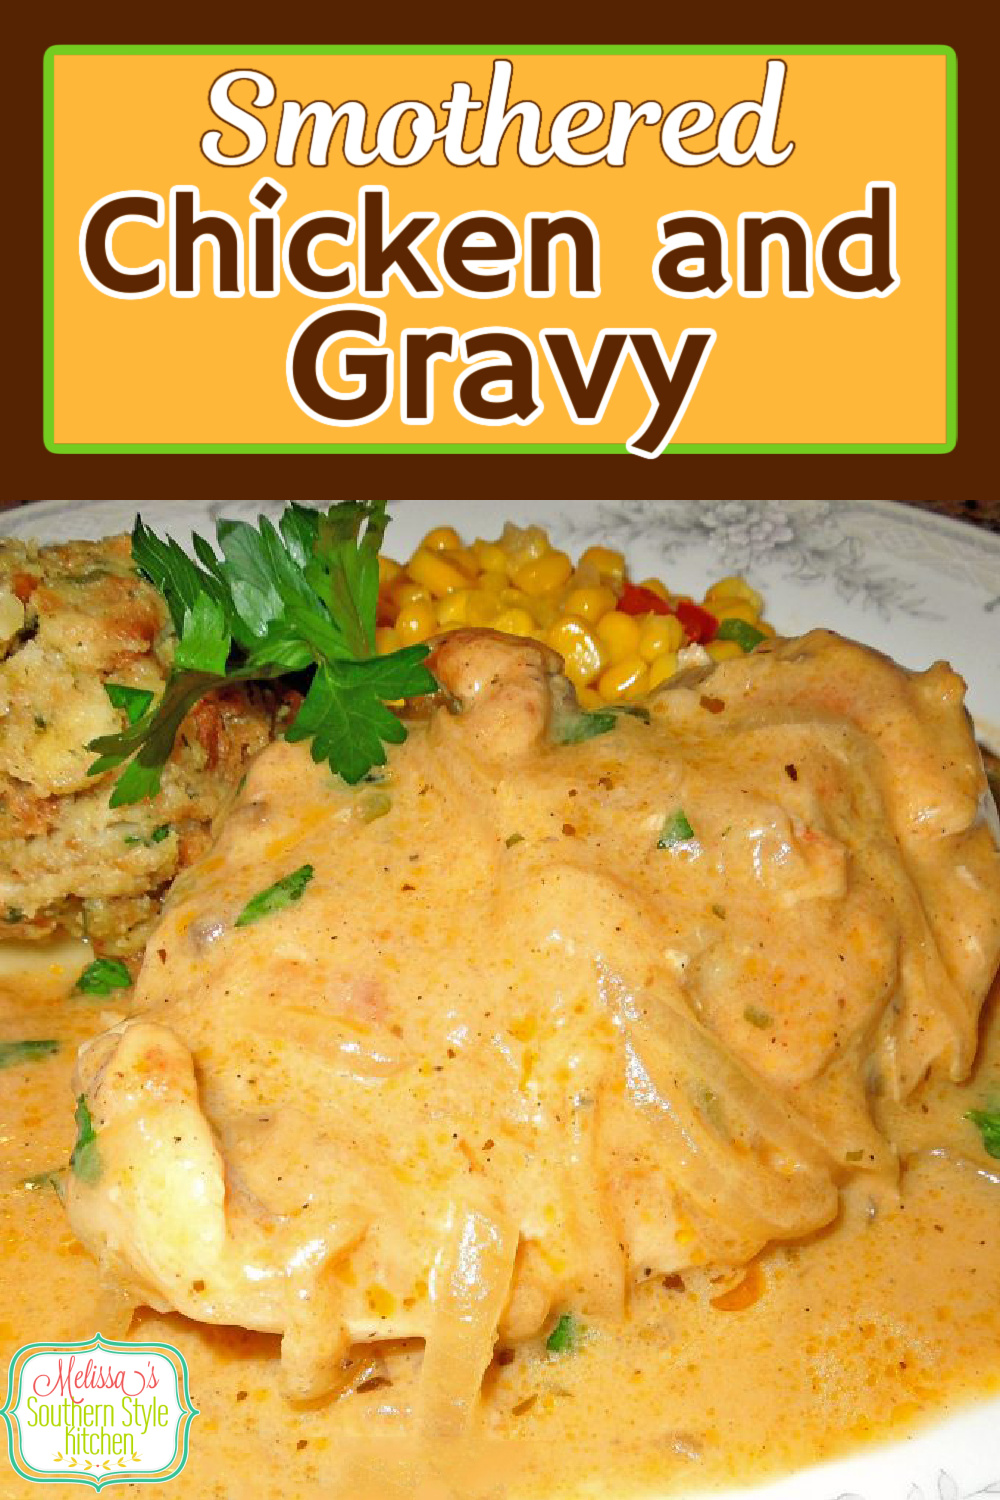 Serve this down home Smothered Chicken And Gravy with your favorite Southern sides #smotheredchicken #chickenandgravy #easychickenrecipes #chicken #chickenbreastrecipes #gravy #southernfriedchicken #roastchicken #chickengravy via @melissasssk